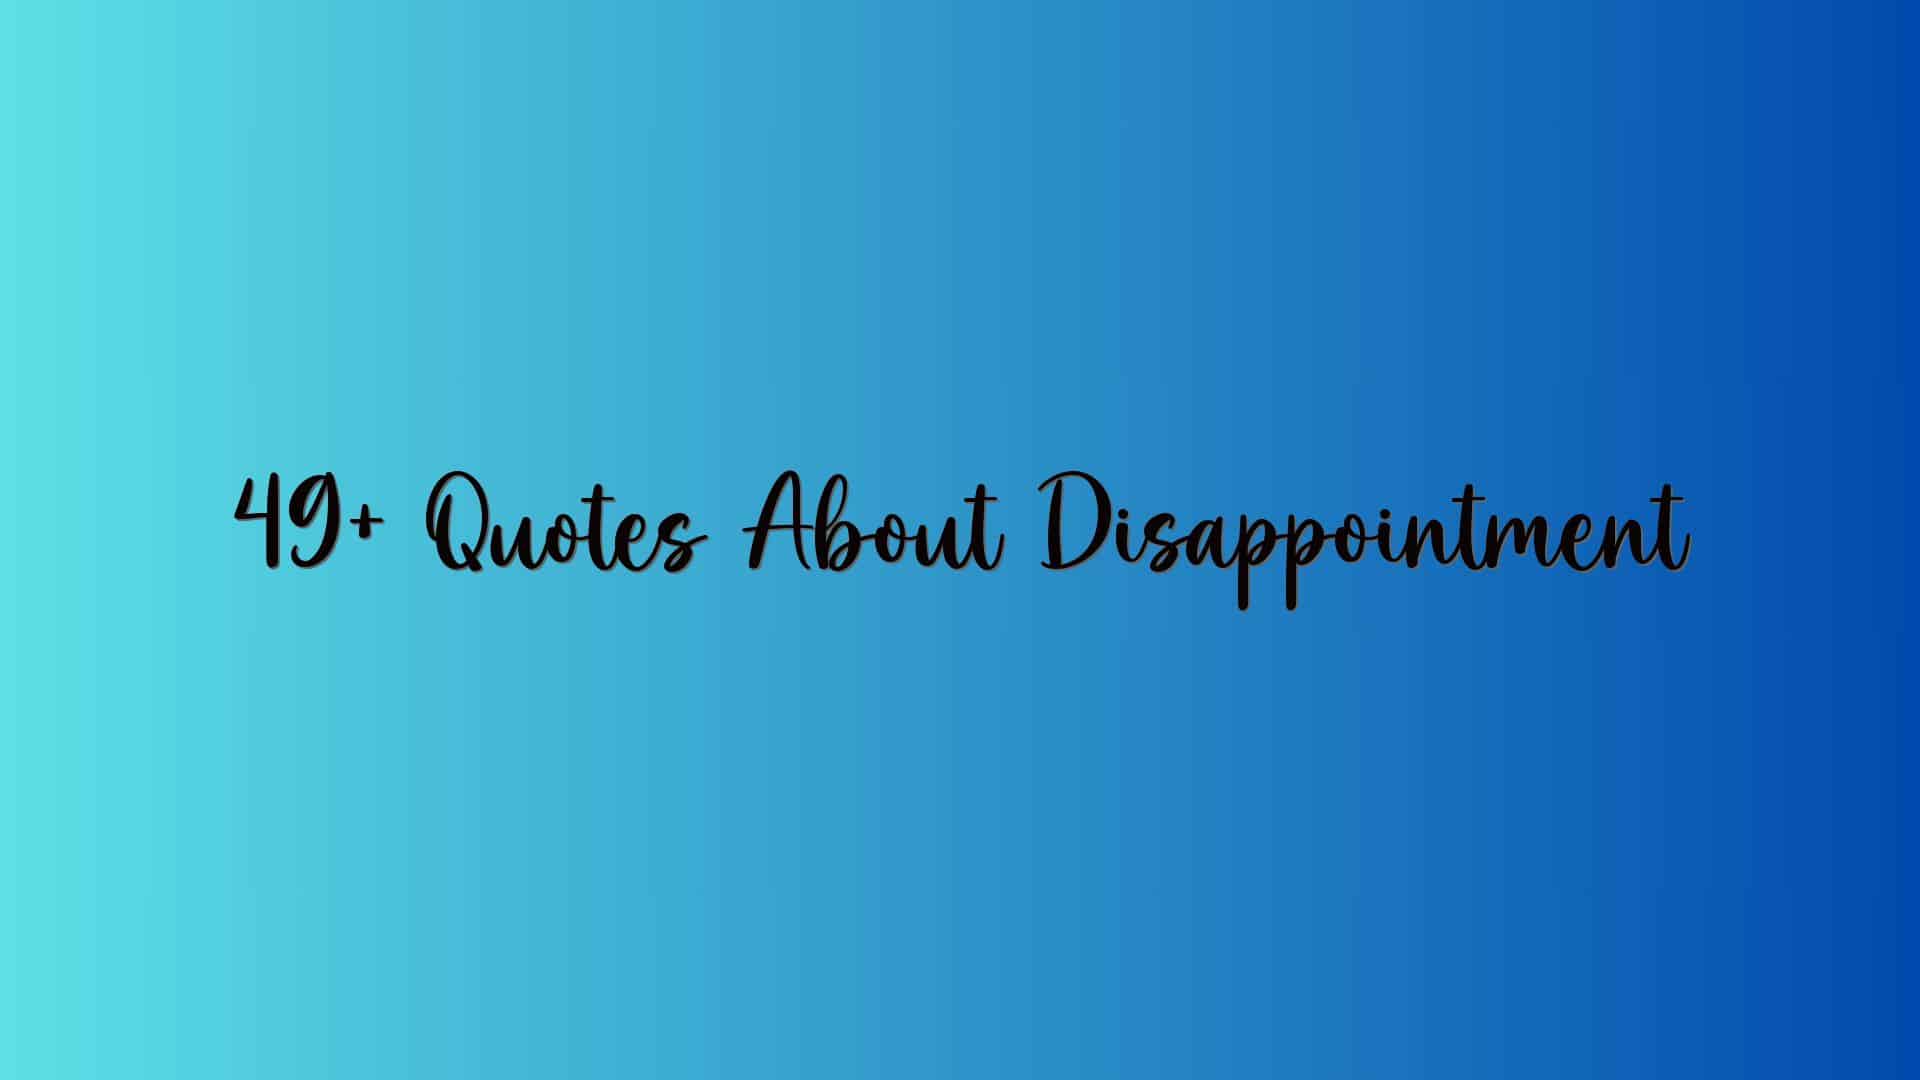 49+ Quotes About Disappointment